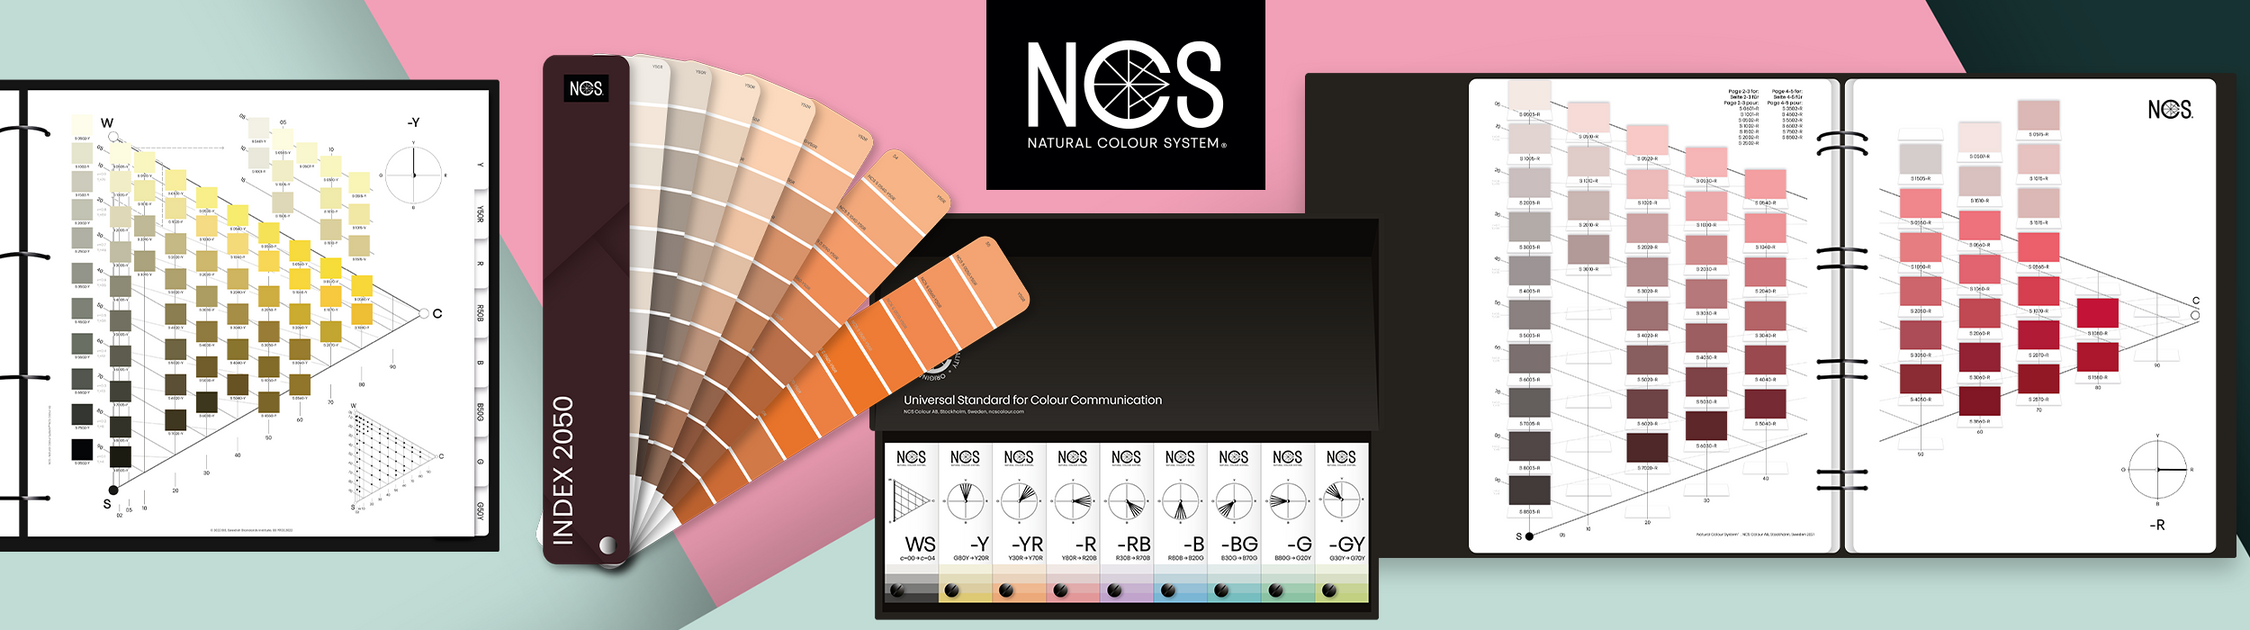 NCS grows from 1950 to 2050 Standard colours! — Color Confidence